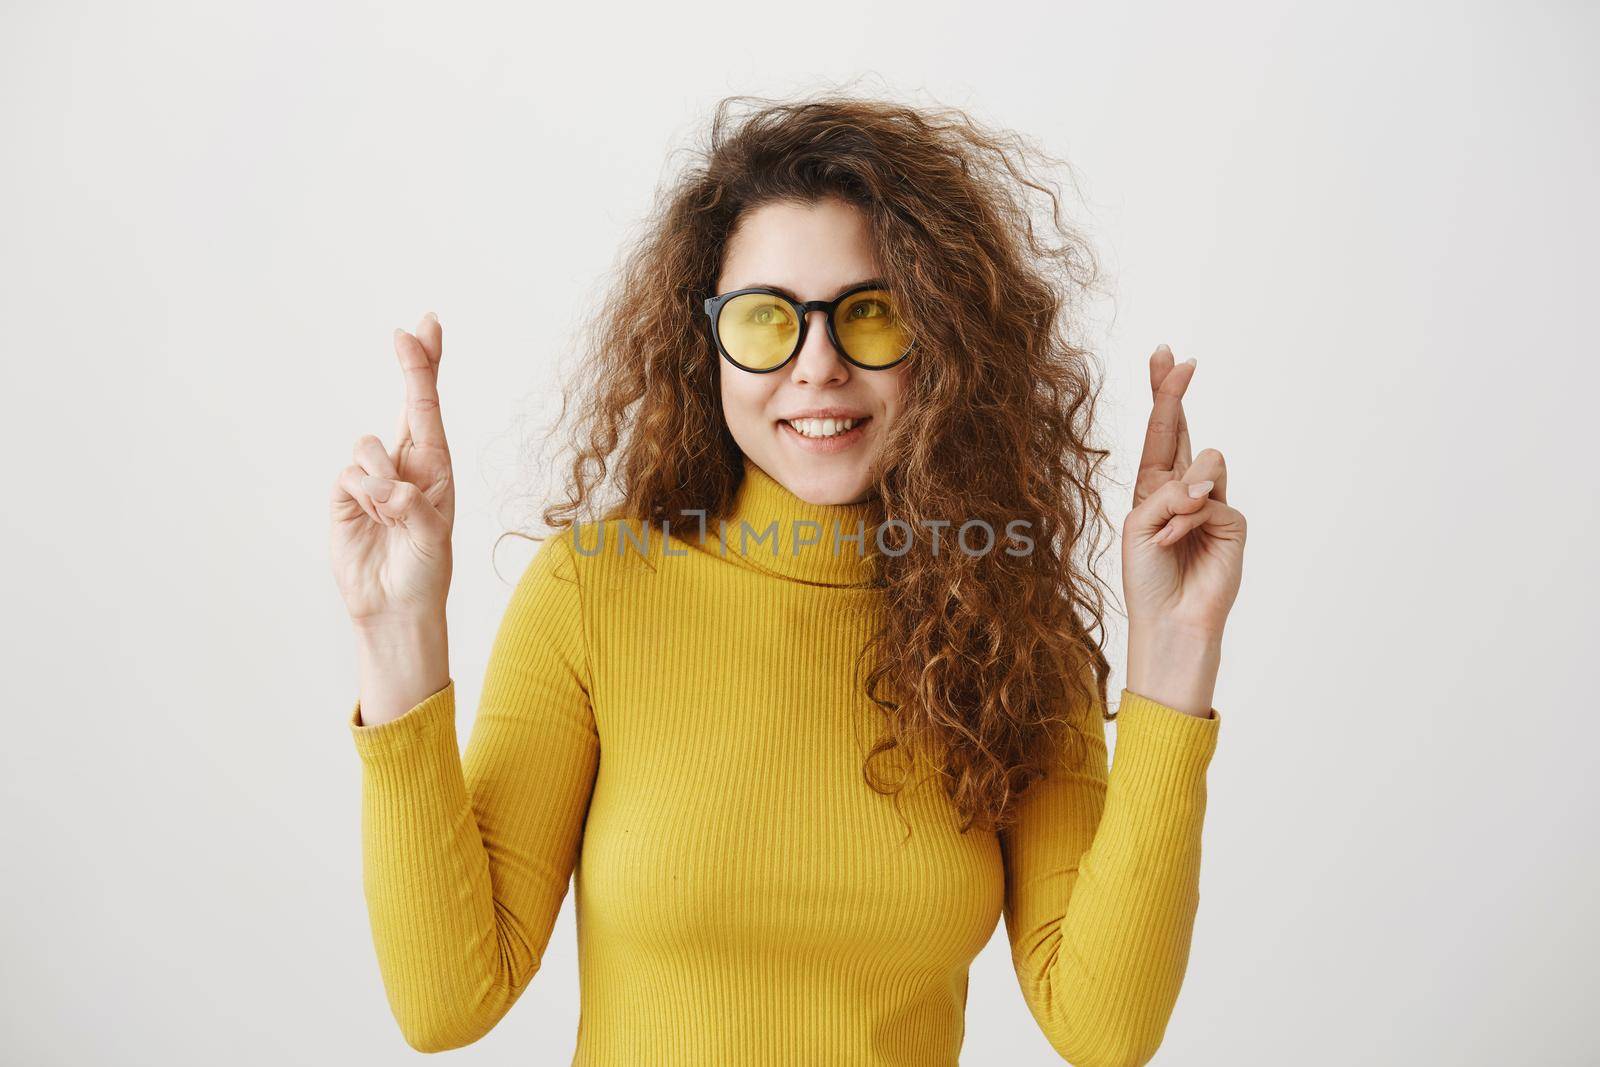 Excited woman in yellow sweater keeping fingers crossed, mouth wide open, waiting for special moment isolated on grey background